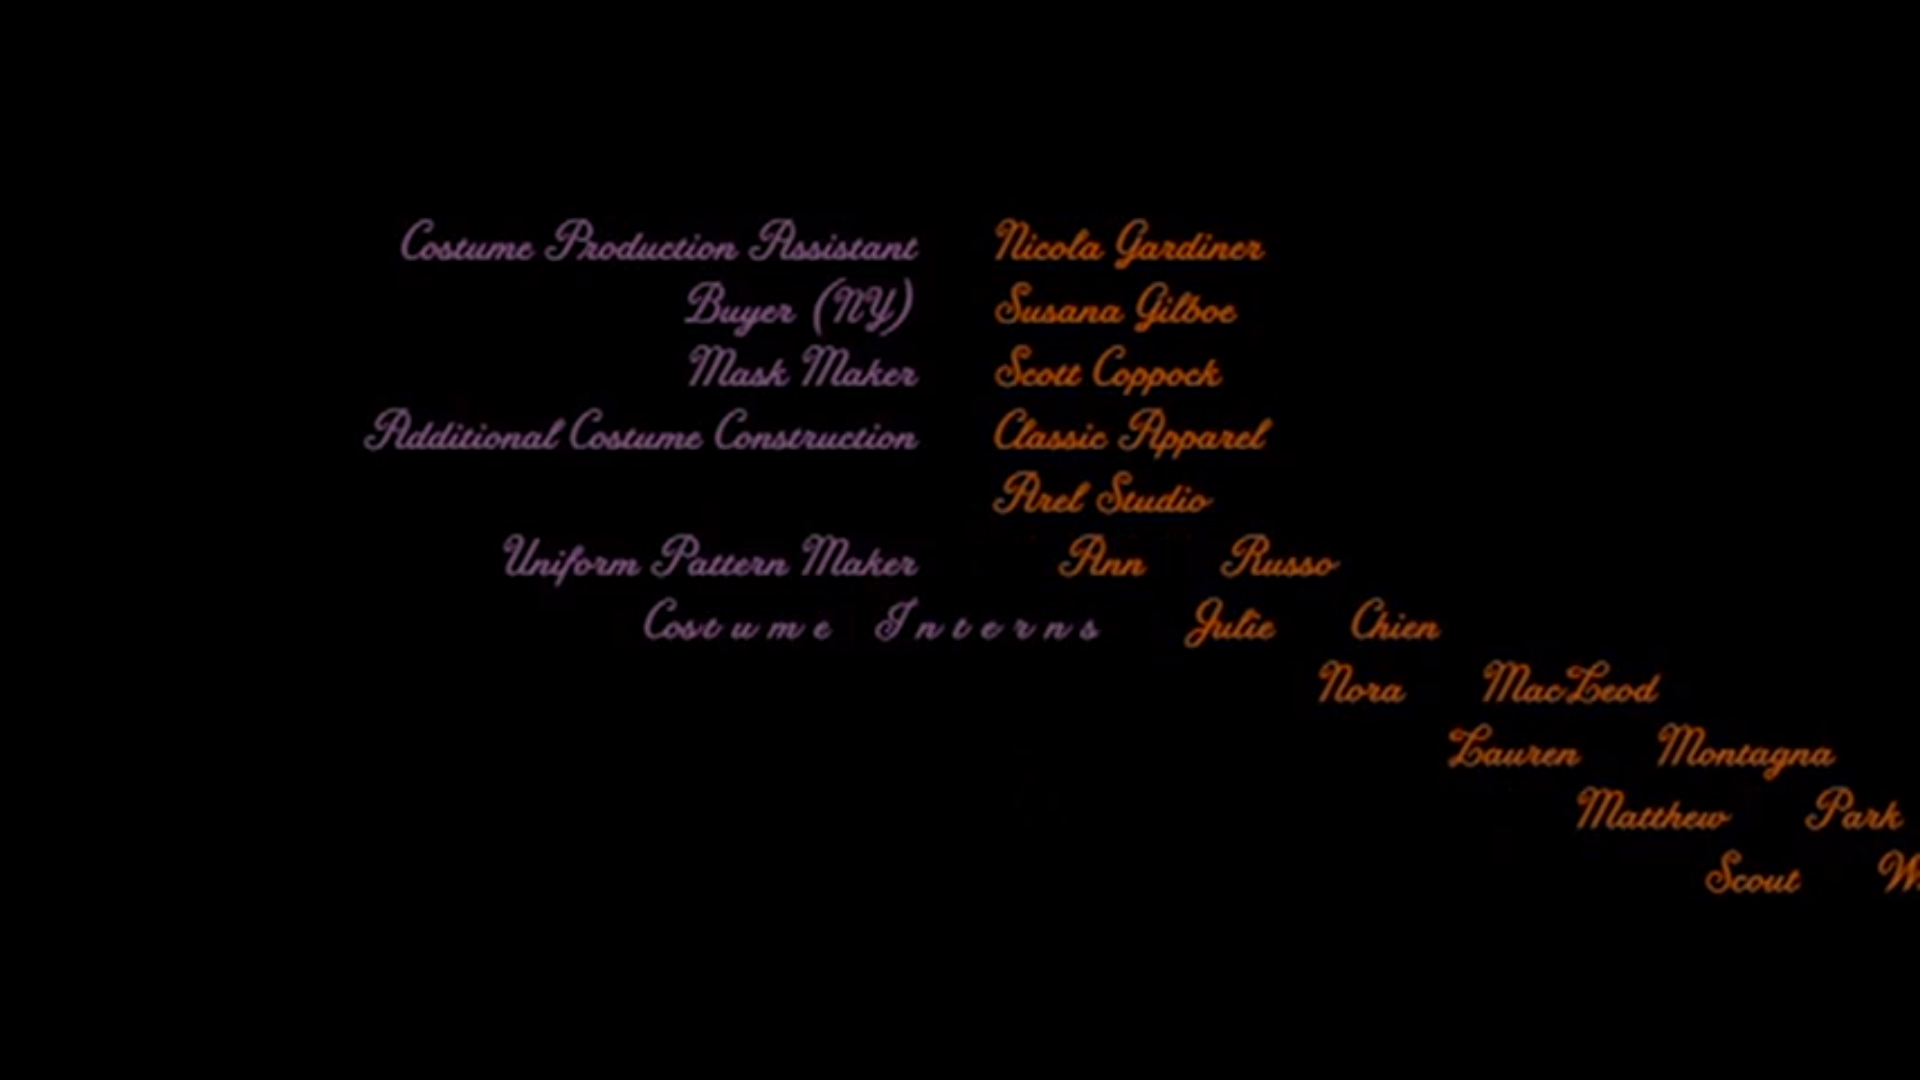 Moonrise Kingdom – End Credits | The Typothecary